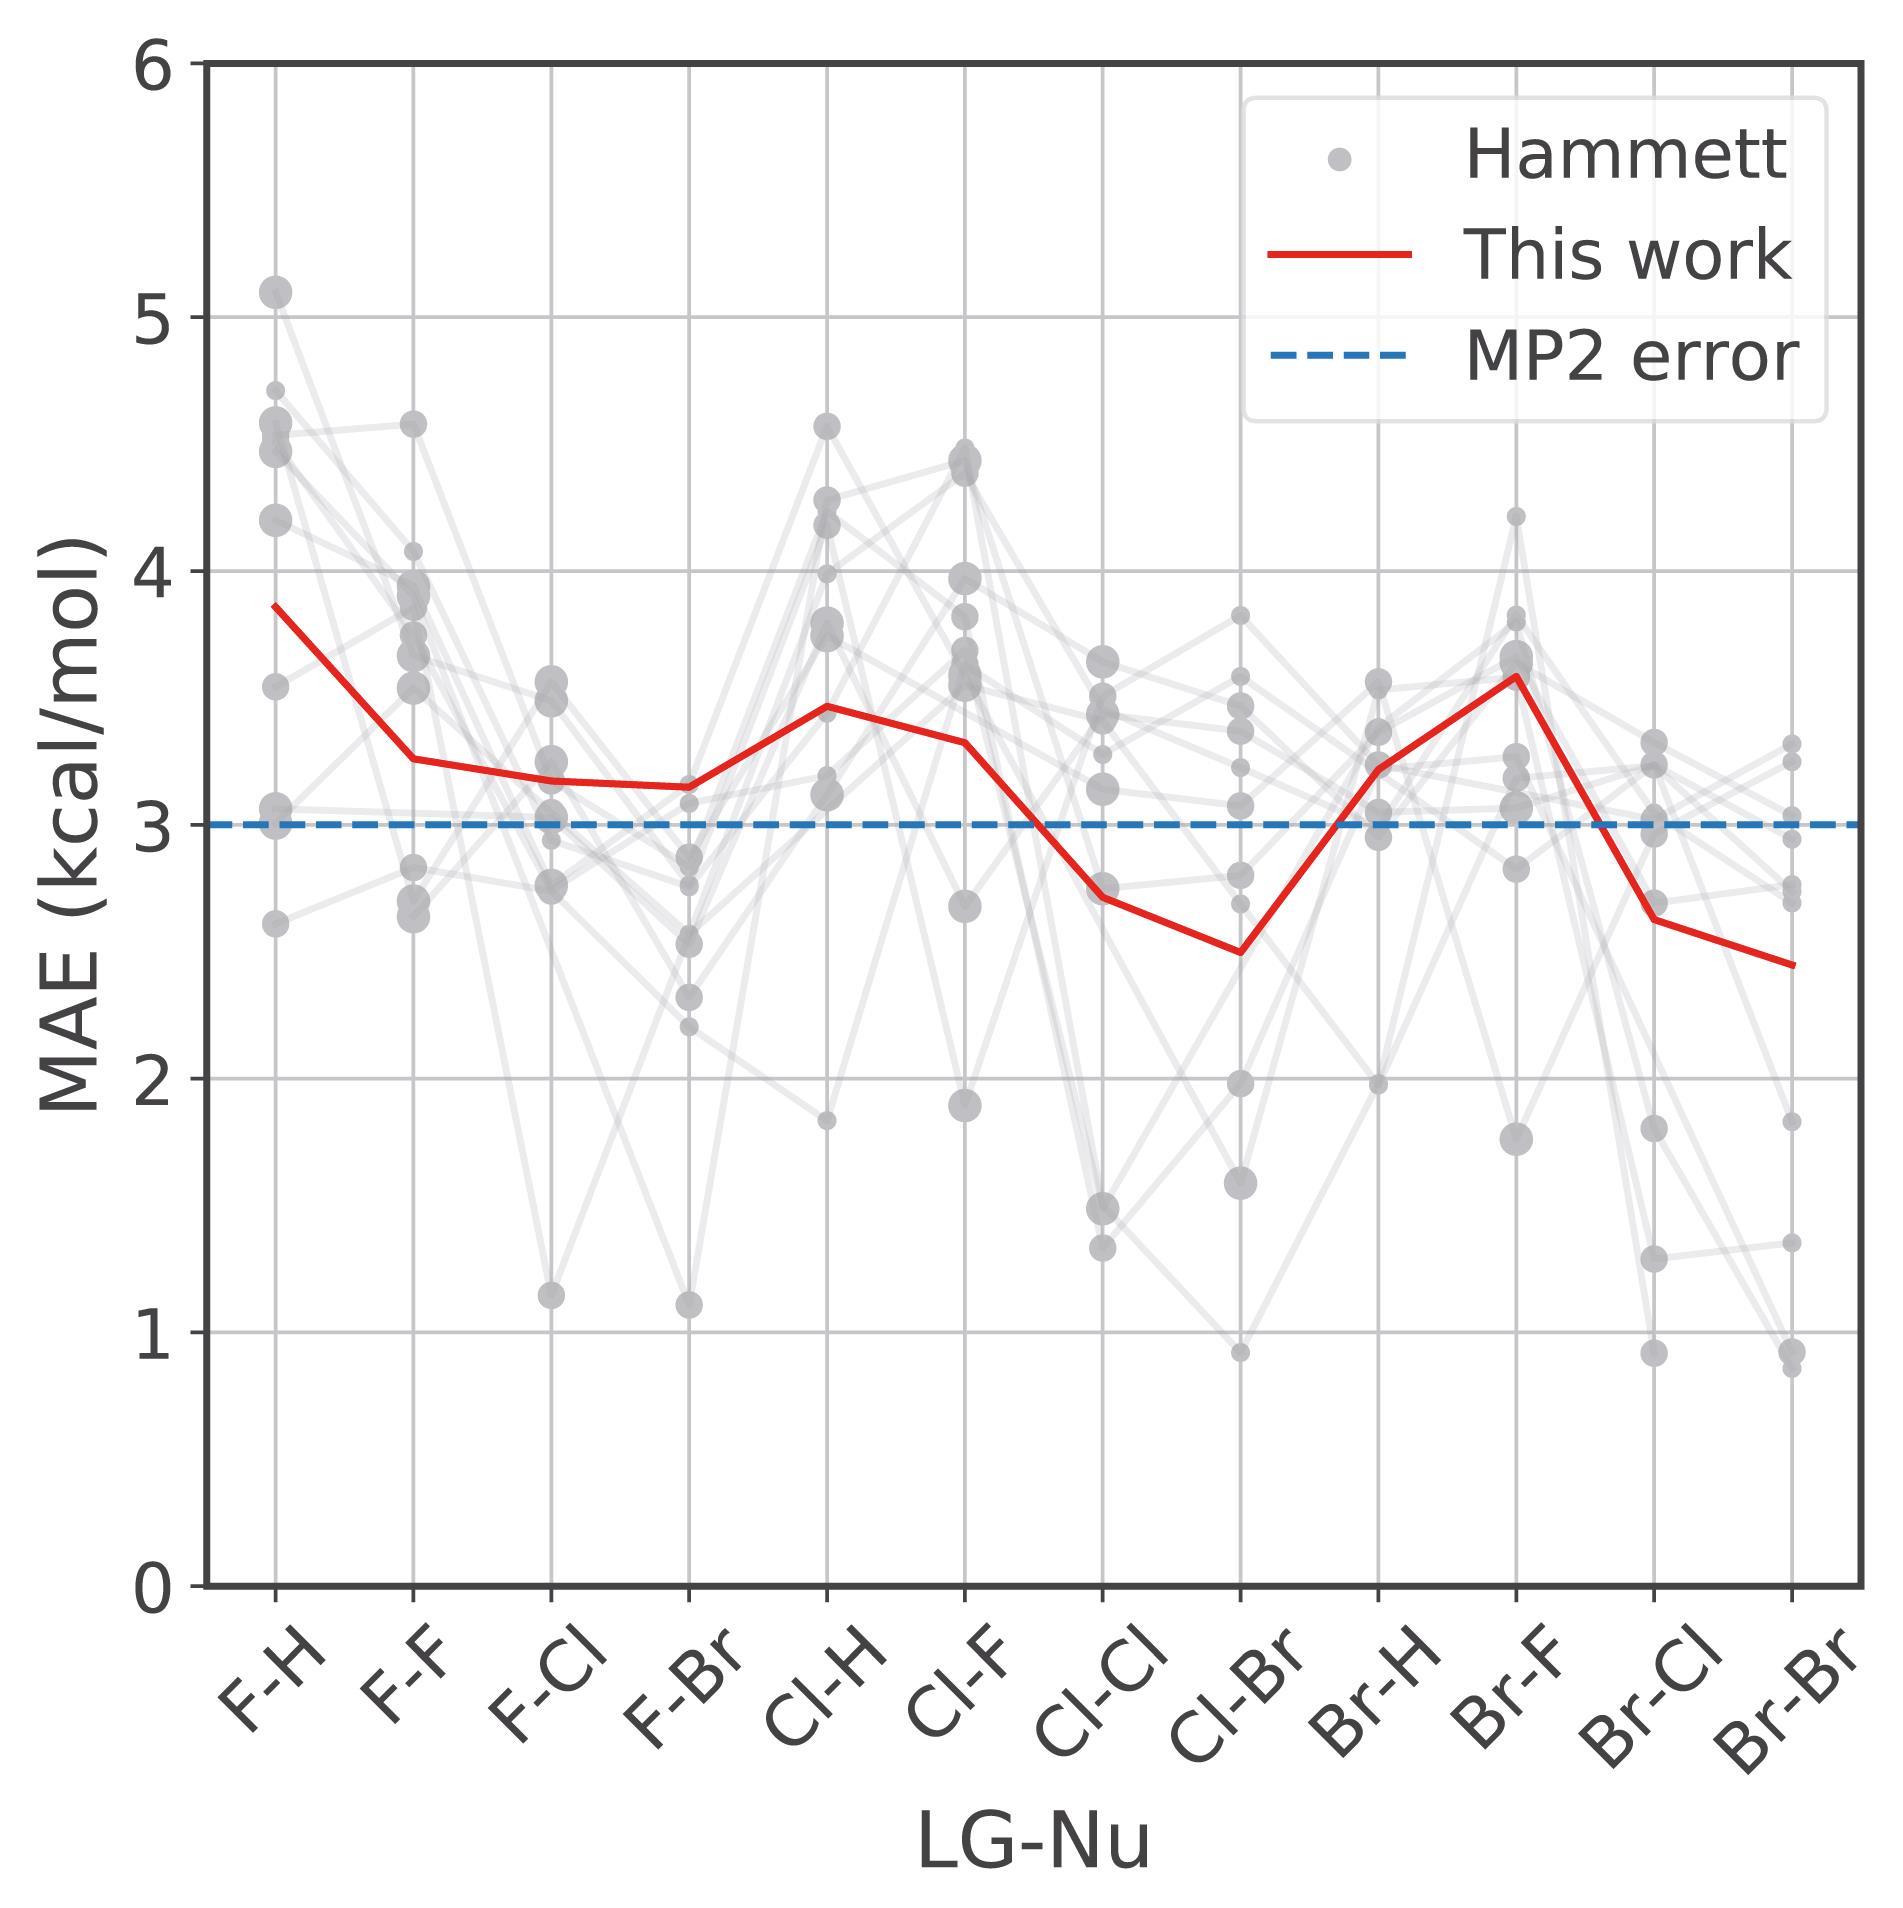 hammett-equation-parameters-optimised-for-improved-predictive-power